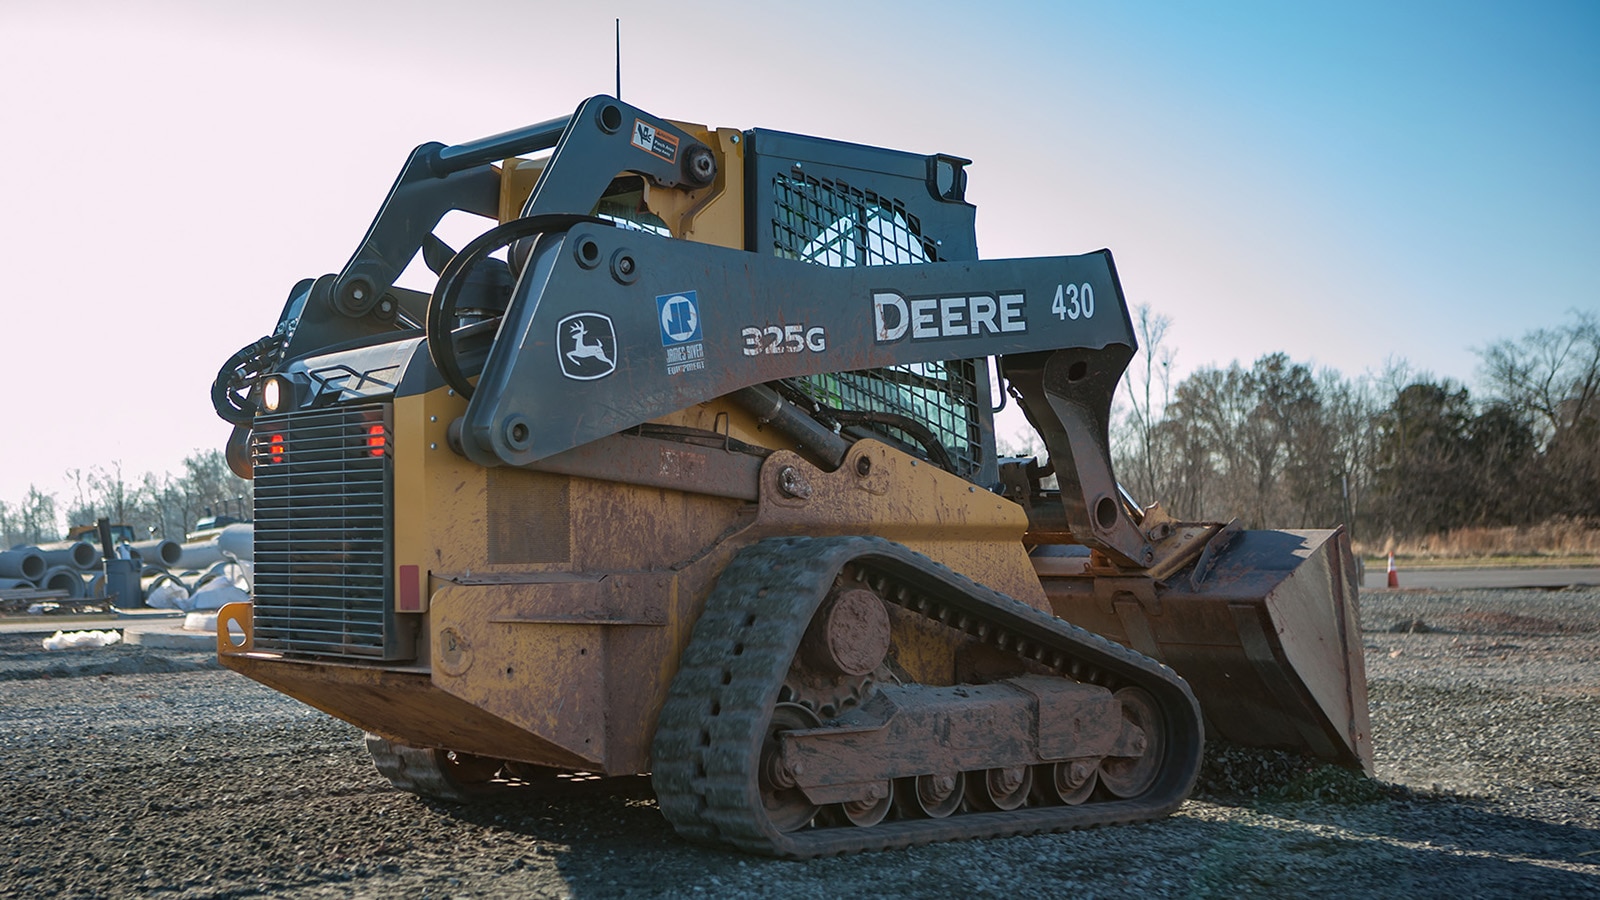 325G Compact Track Loader, covered in dirt and mud, drives across a gravel lot